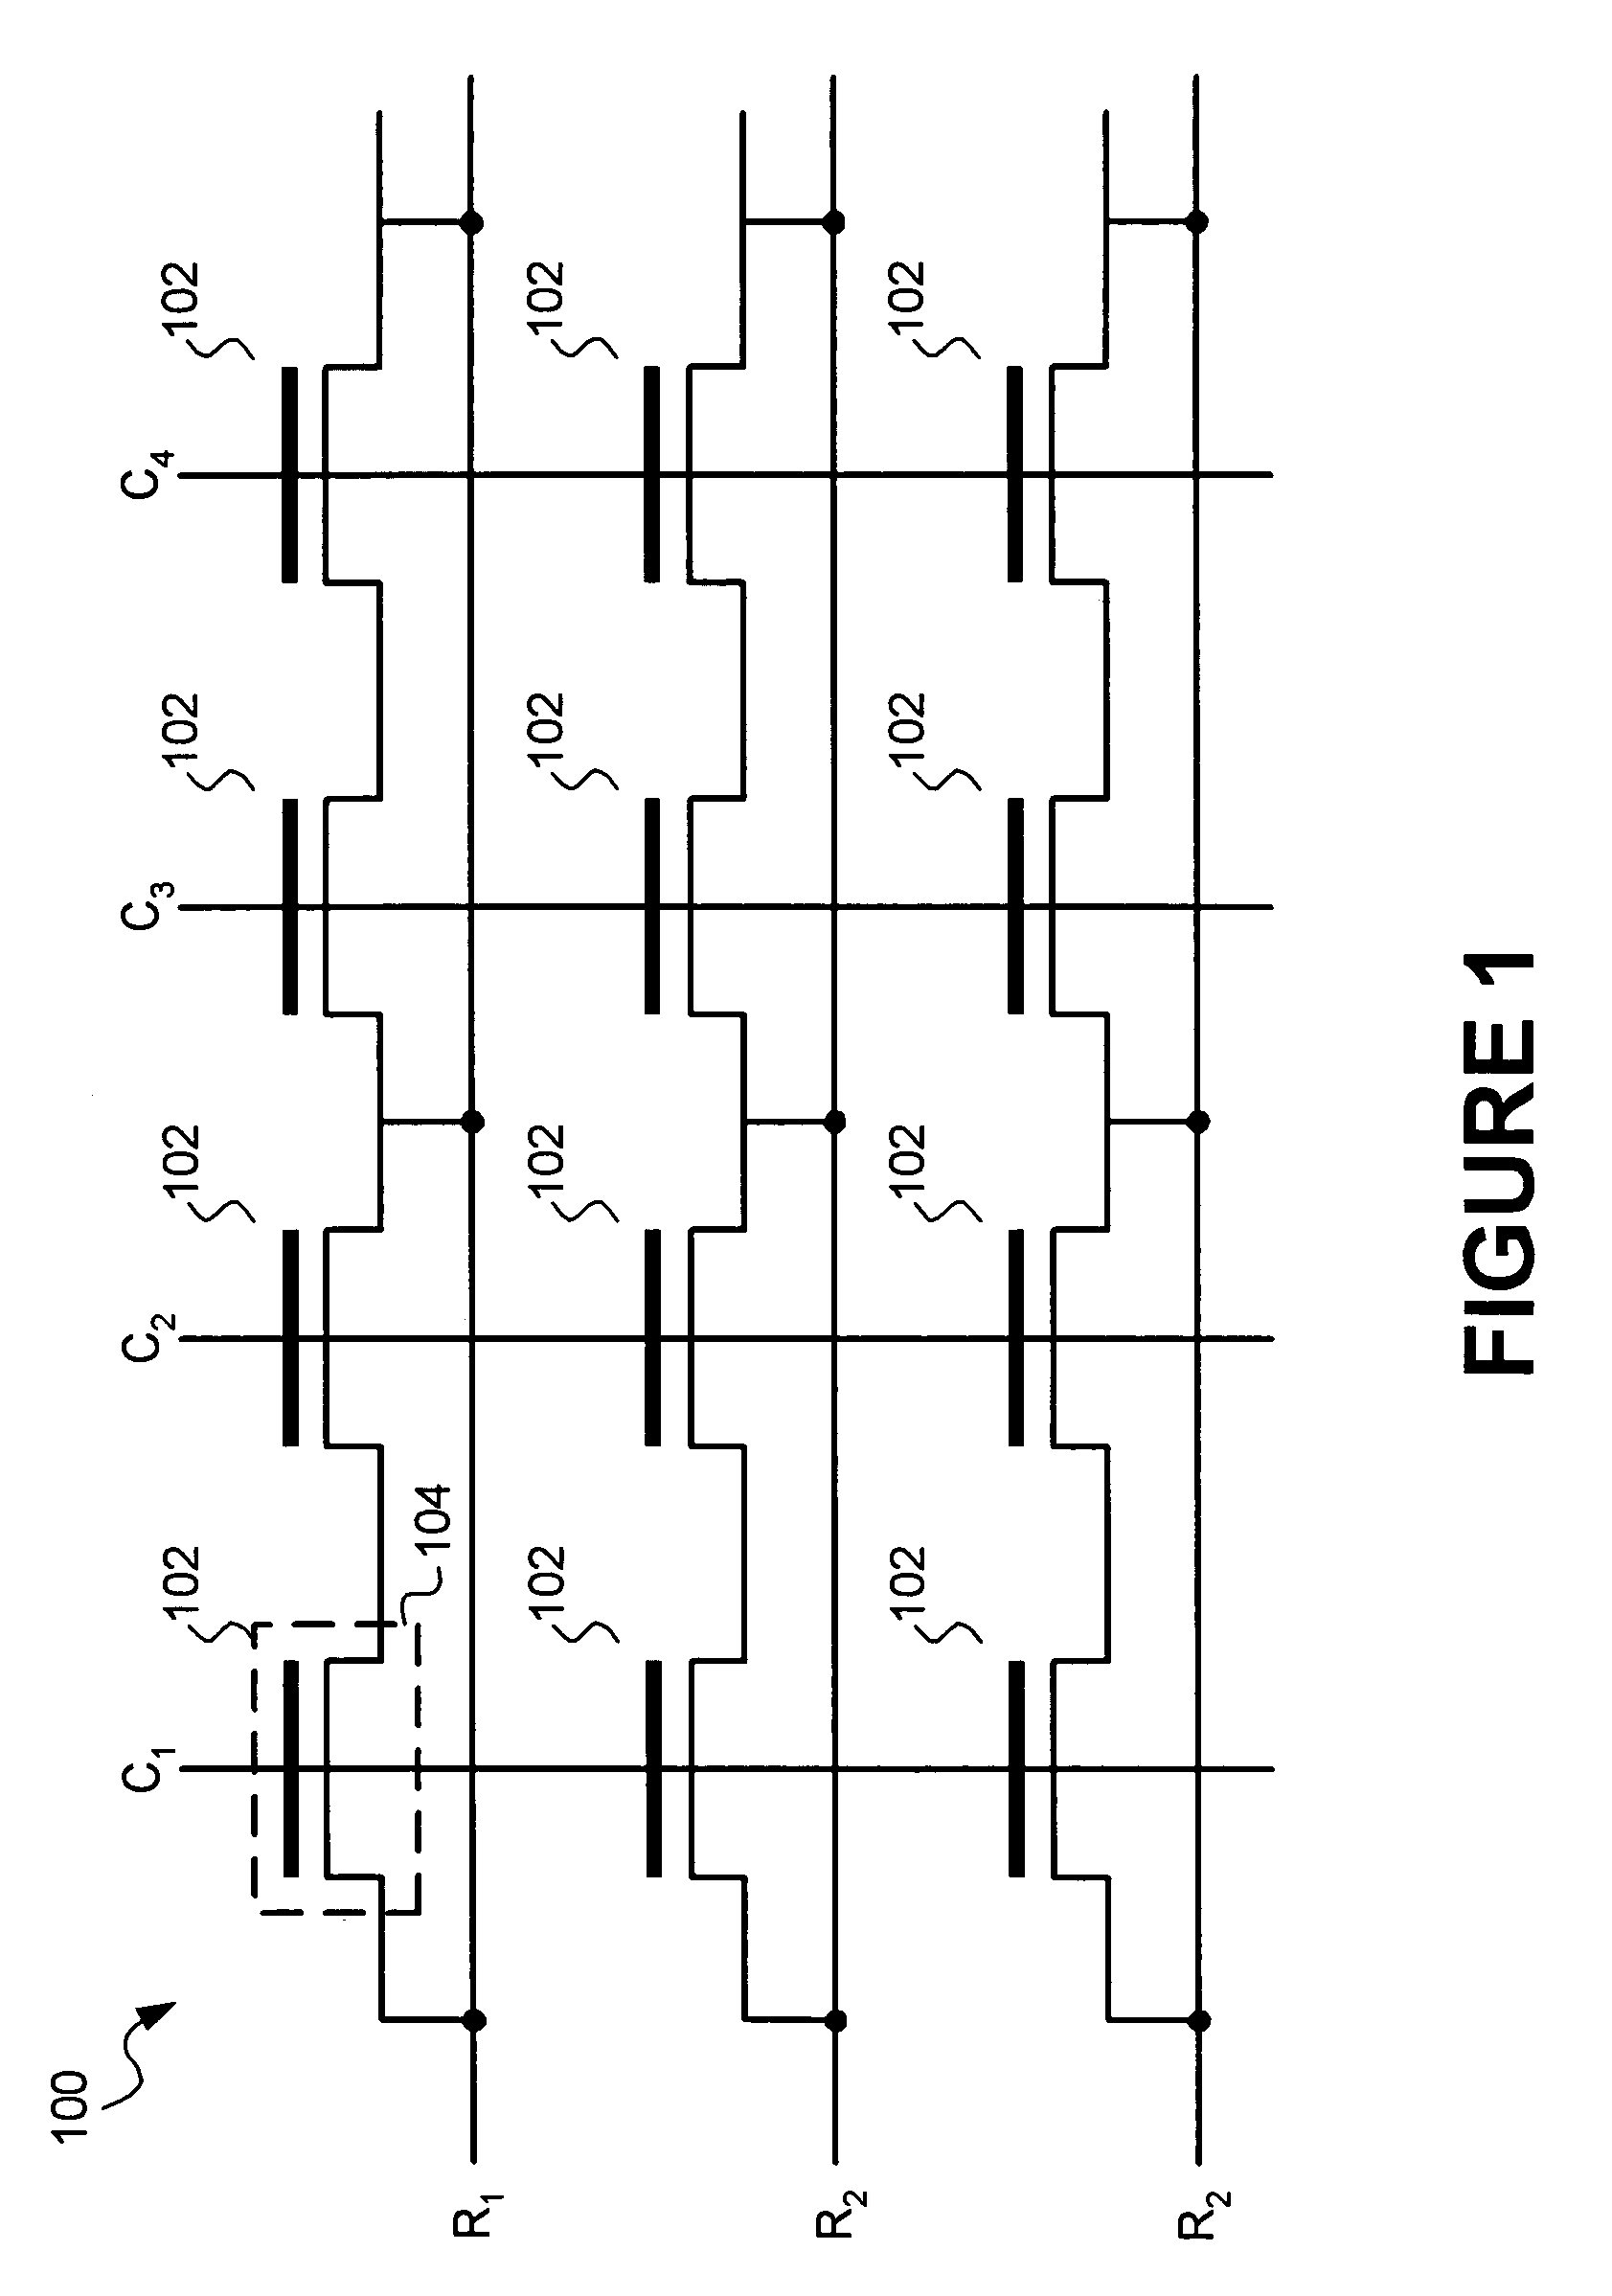 High density semiconductor memory cell and memory array using a single transistor and having counter-doped poly and buried diffusion wordline